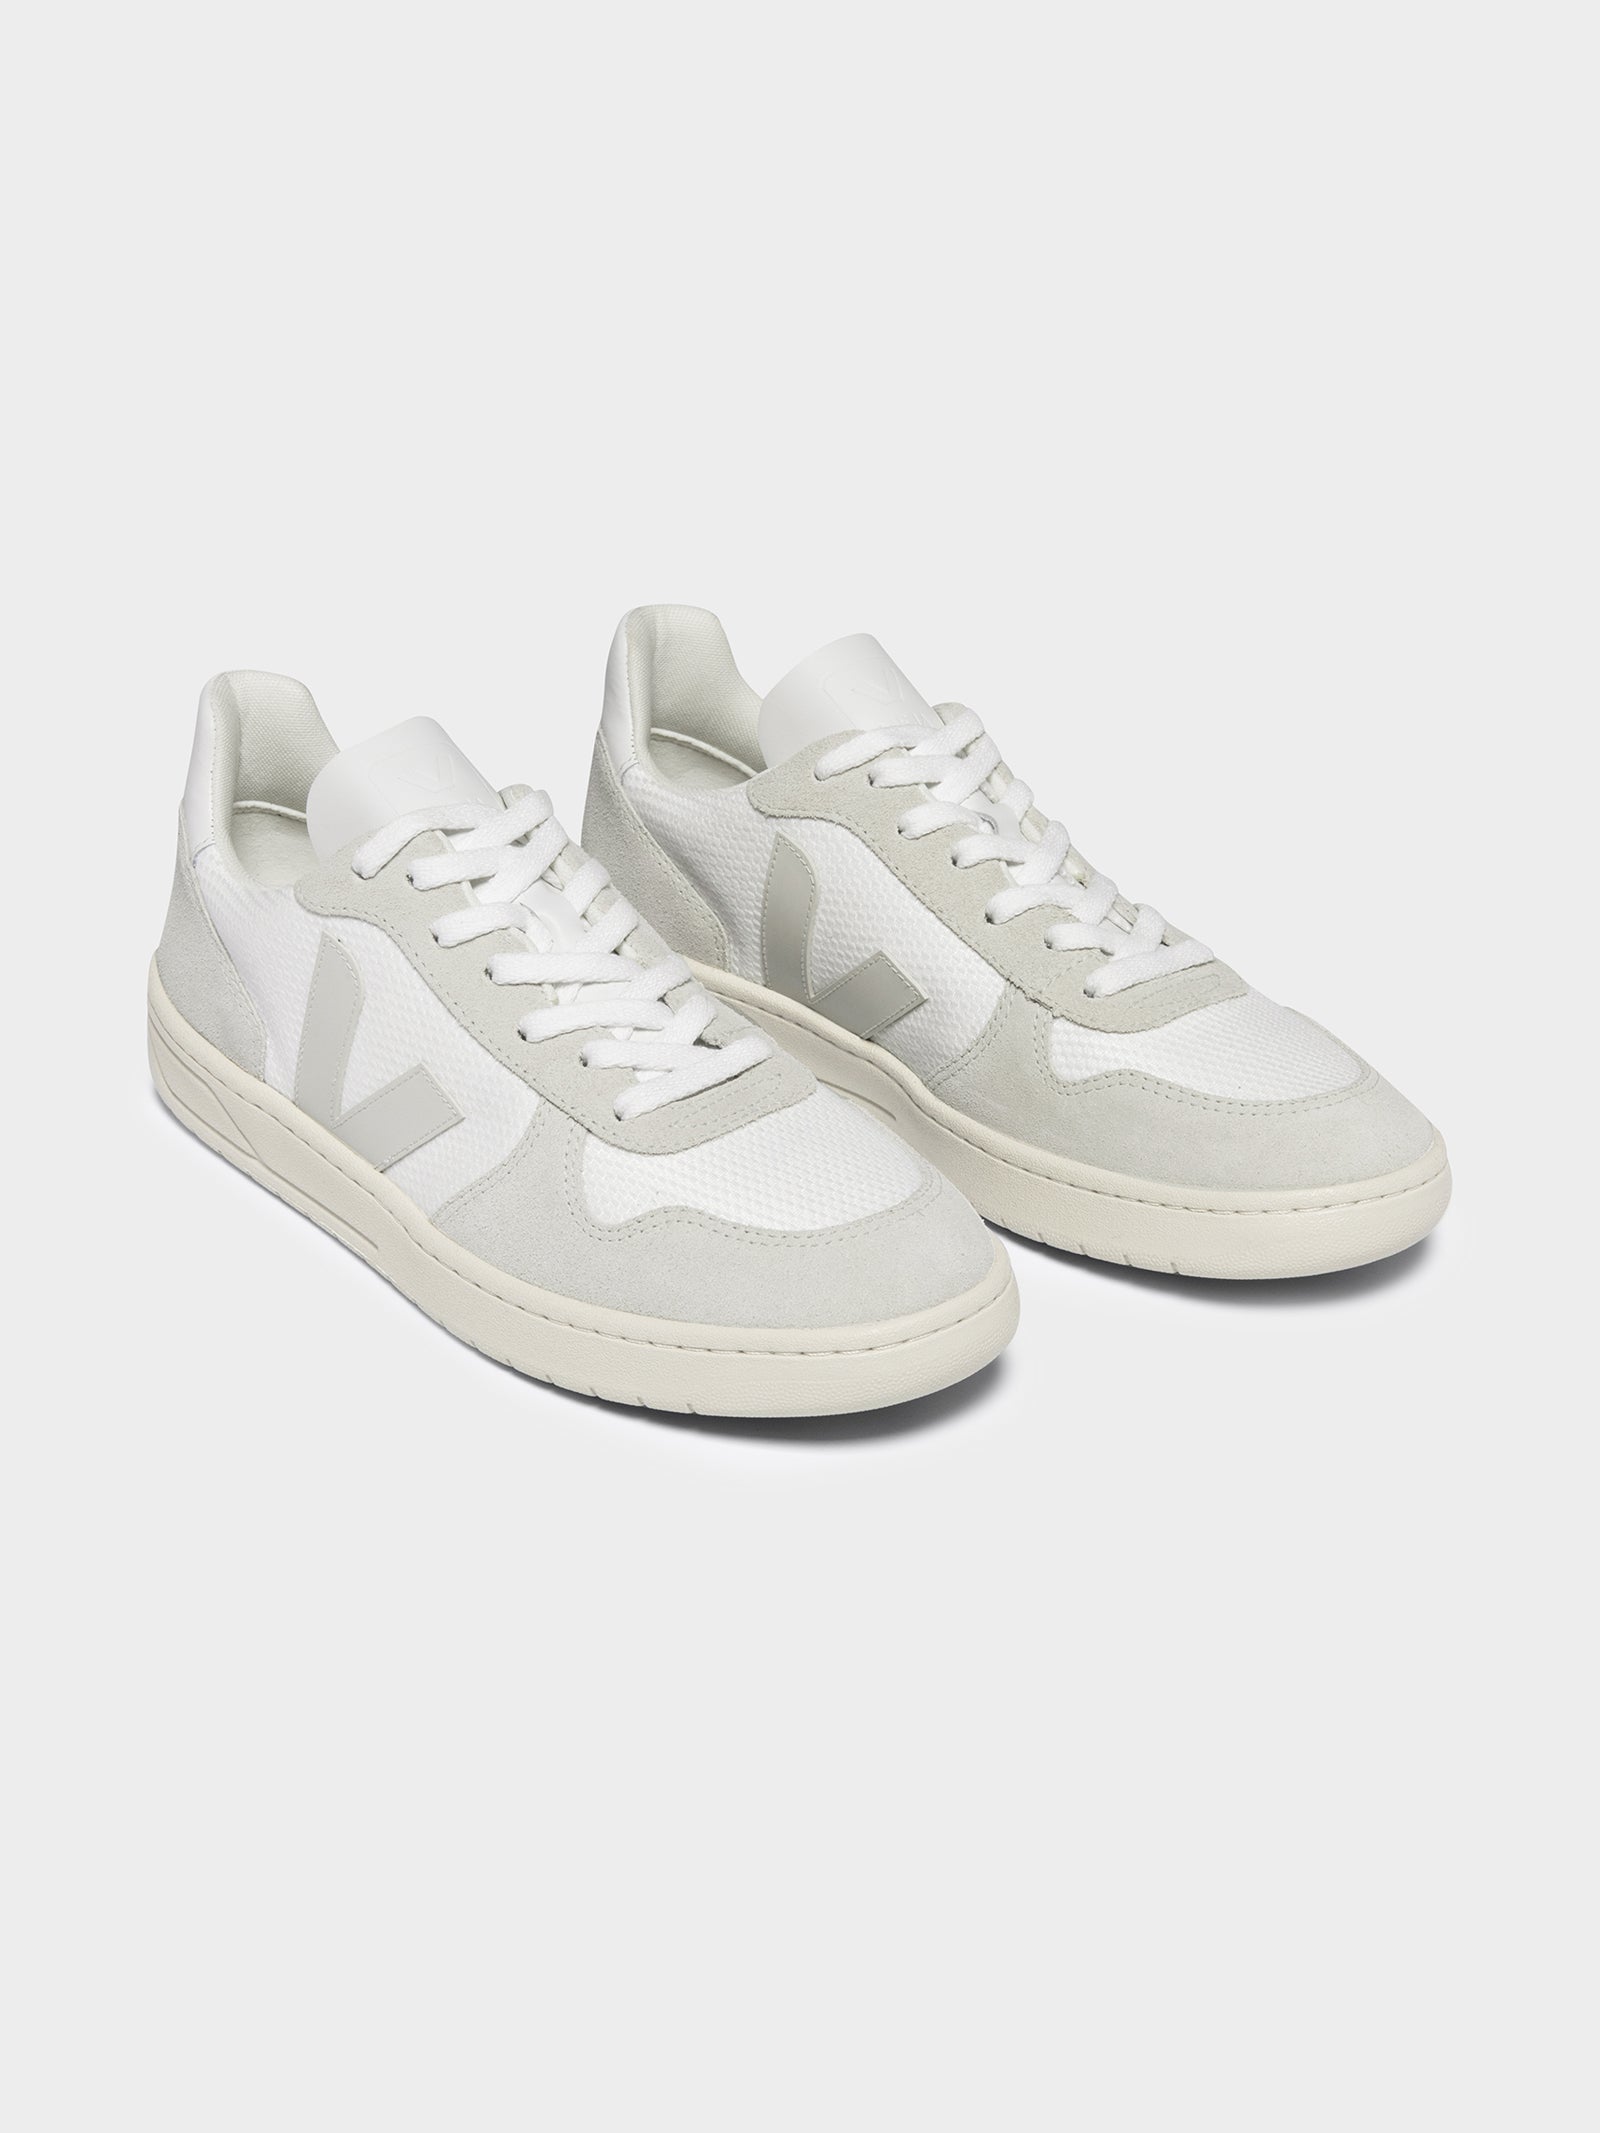 Unisex V10 Leather Suede Sneakers in White & Beige